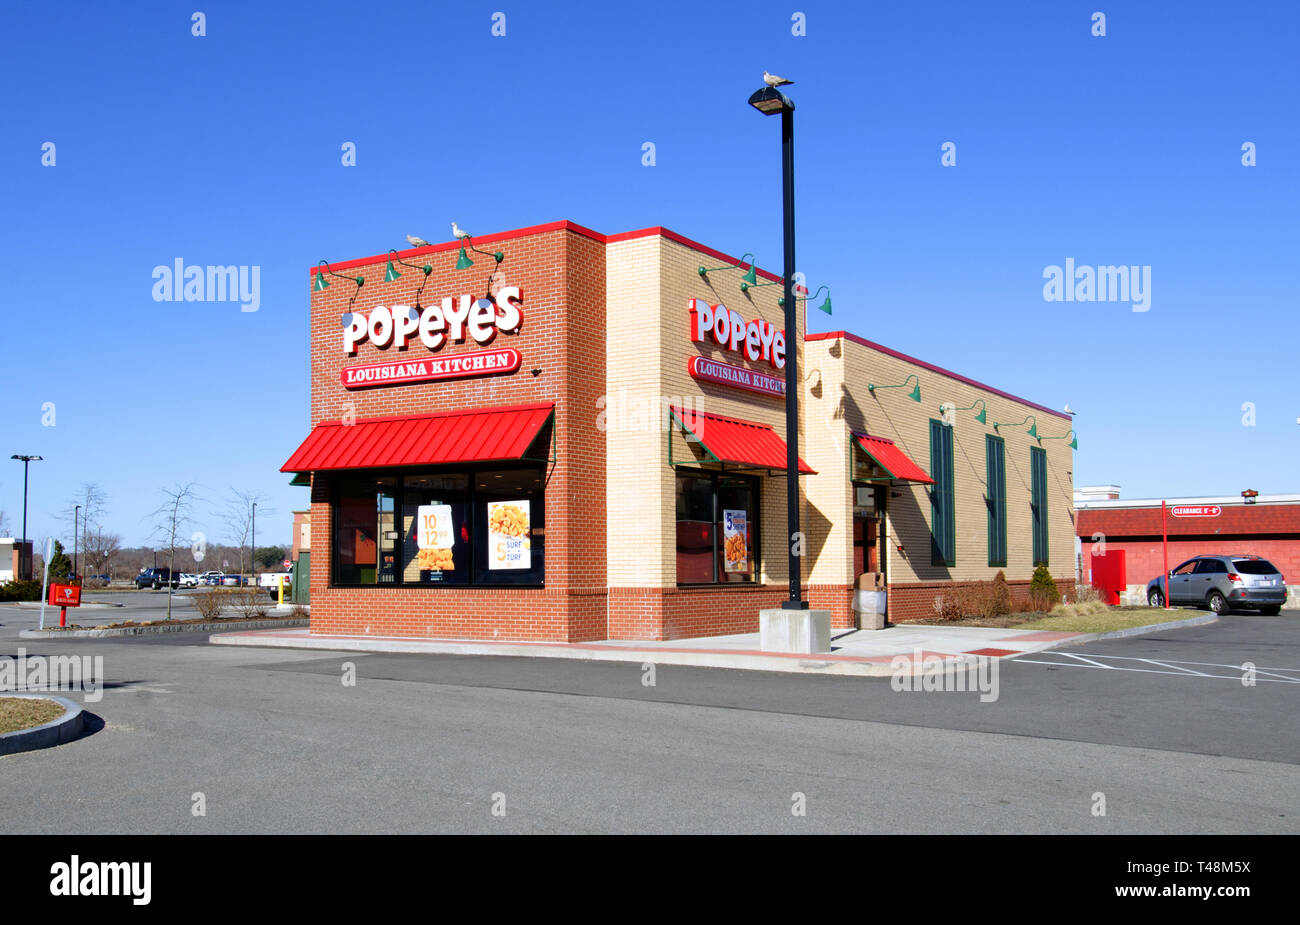 Popeyes Restaurant, a US fast food chain known for southern fried chicken, exterior in New Bedford, Massachusetts USA with a sunny clear deep blue sky Stock Photo